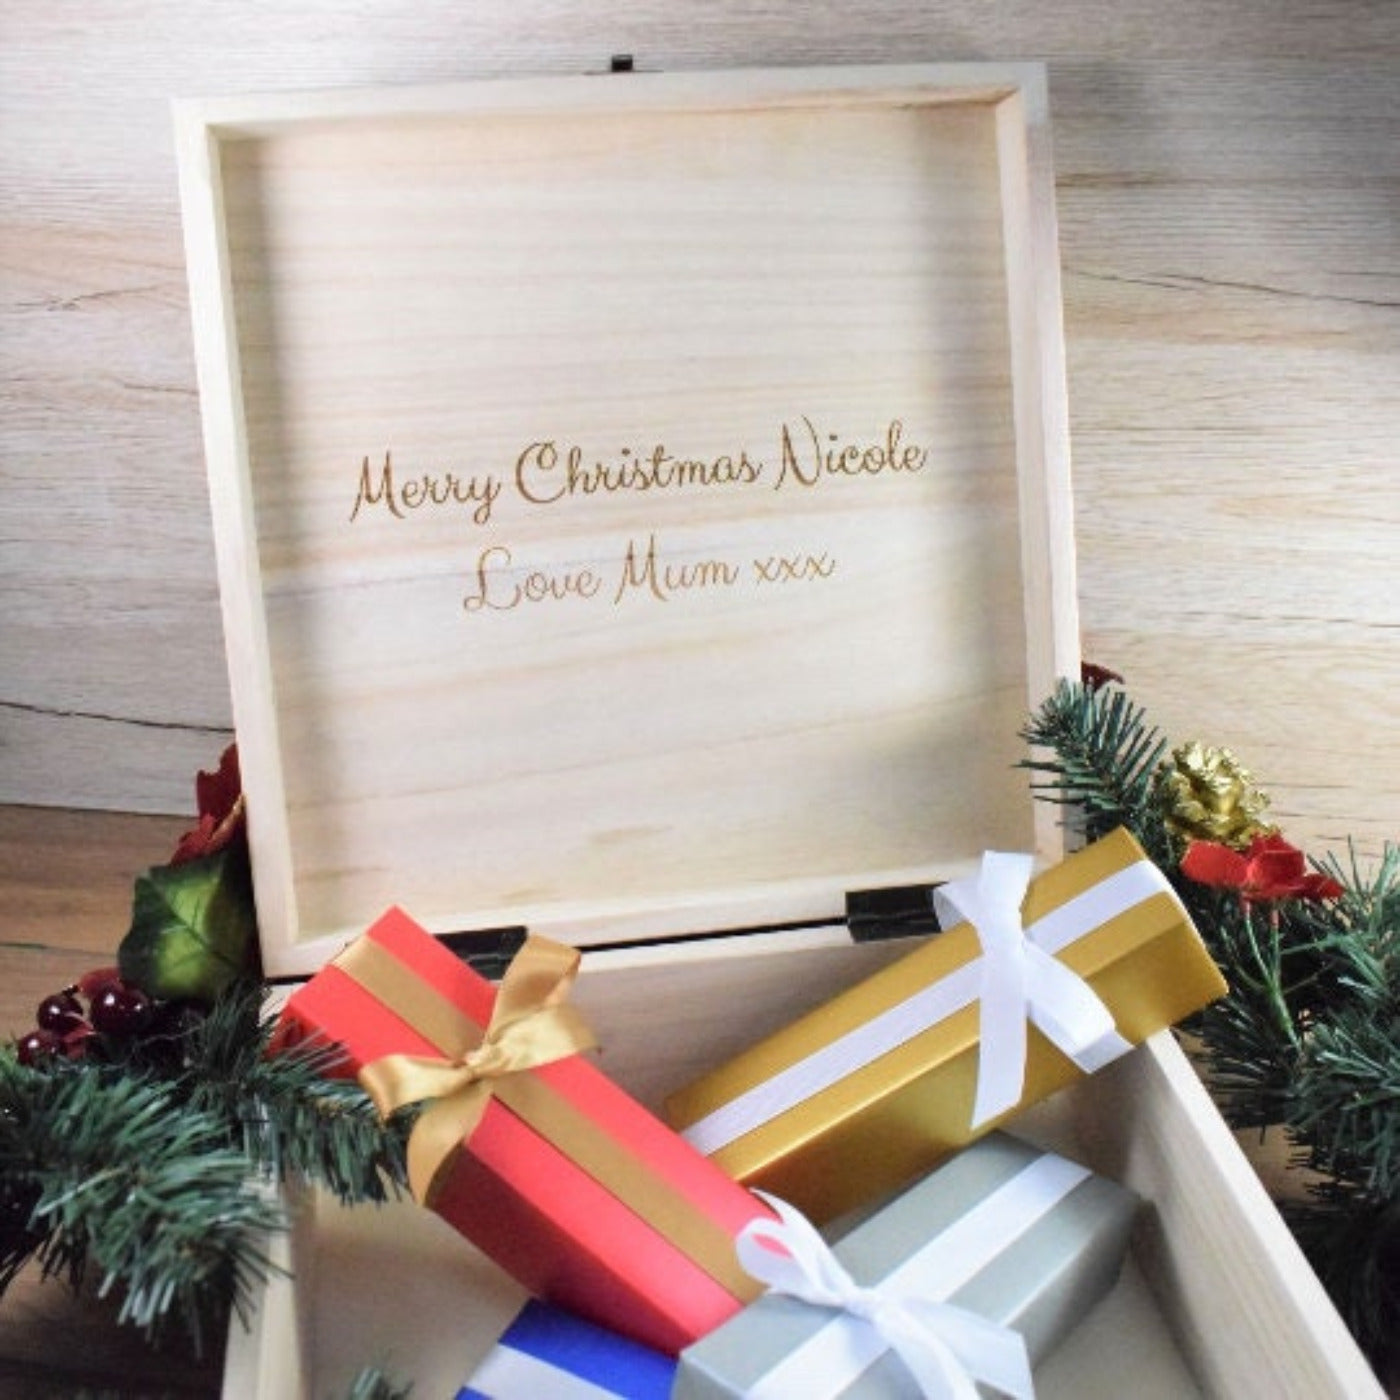 Personalised, Engraved Wooden Christmas Eve Box - The Night Before Christmas